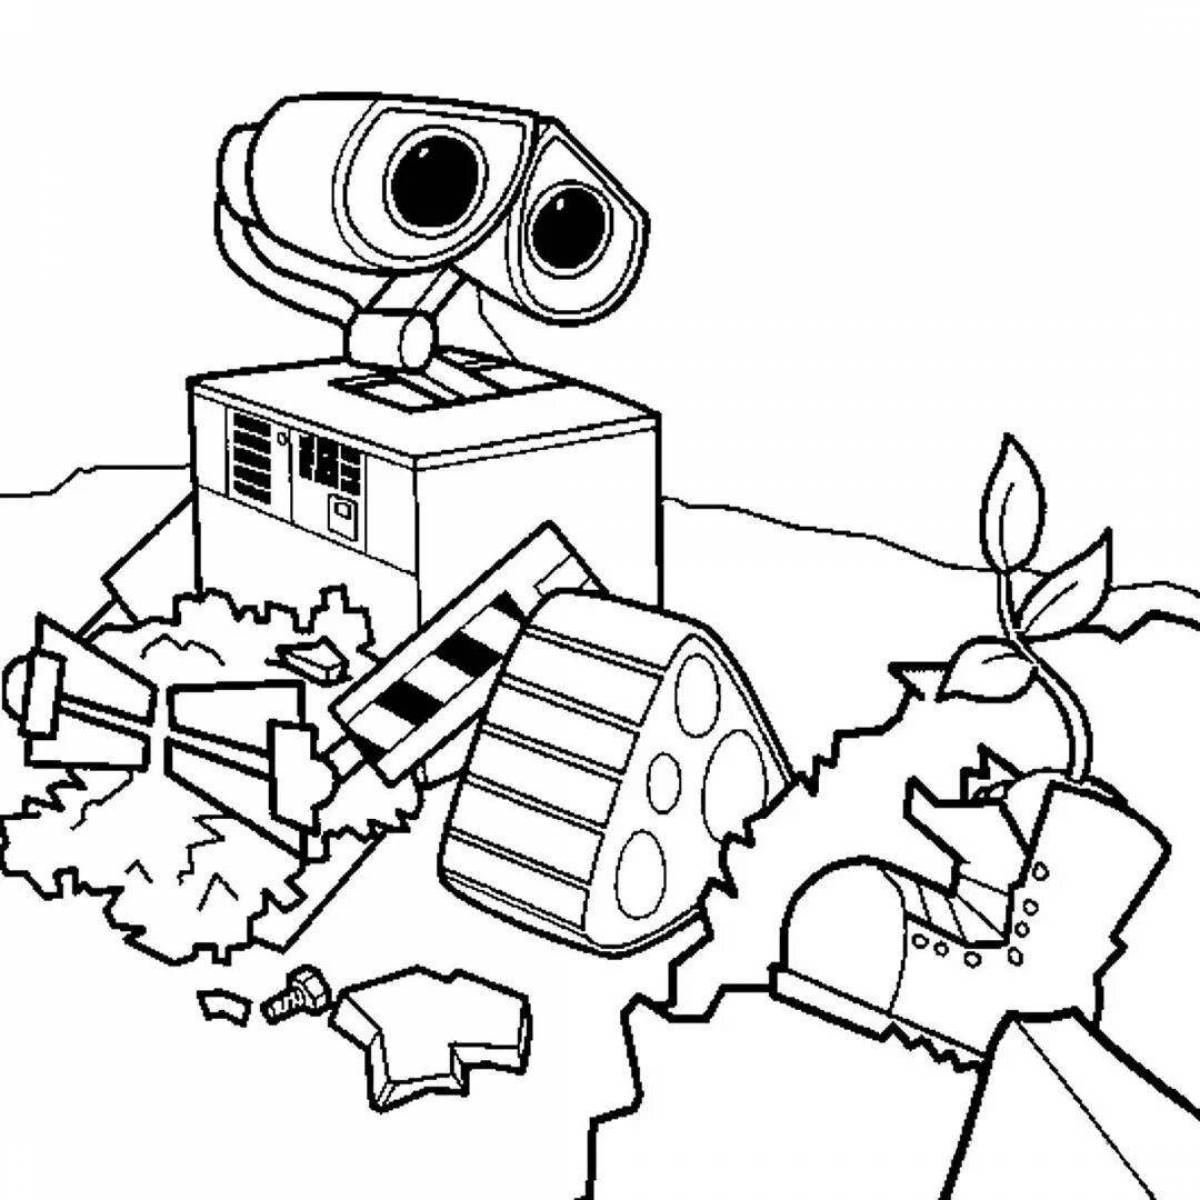 Robot playful valley coloring page